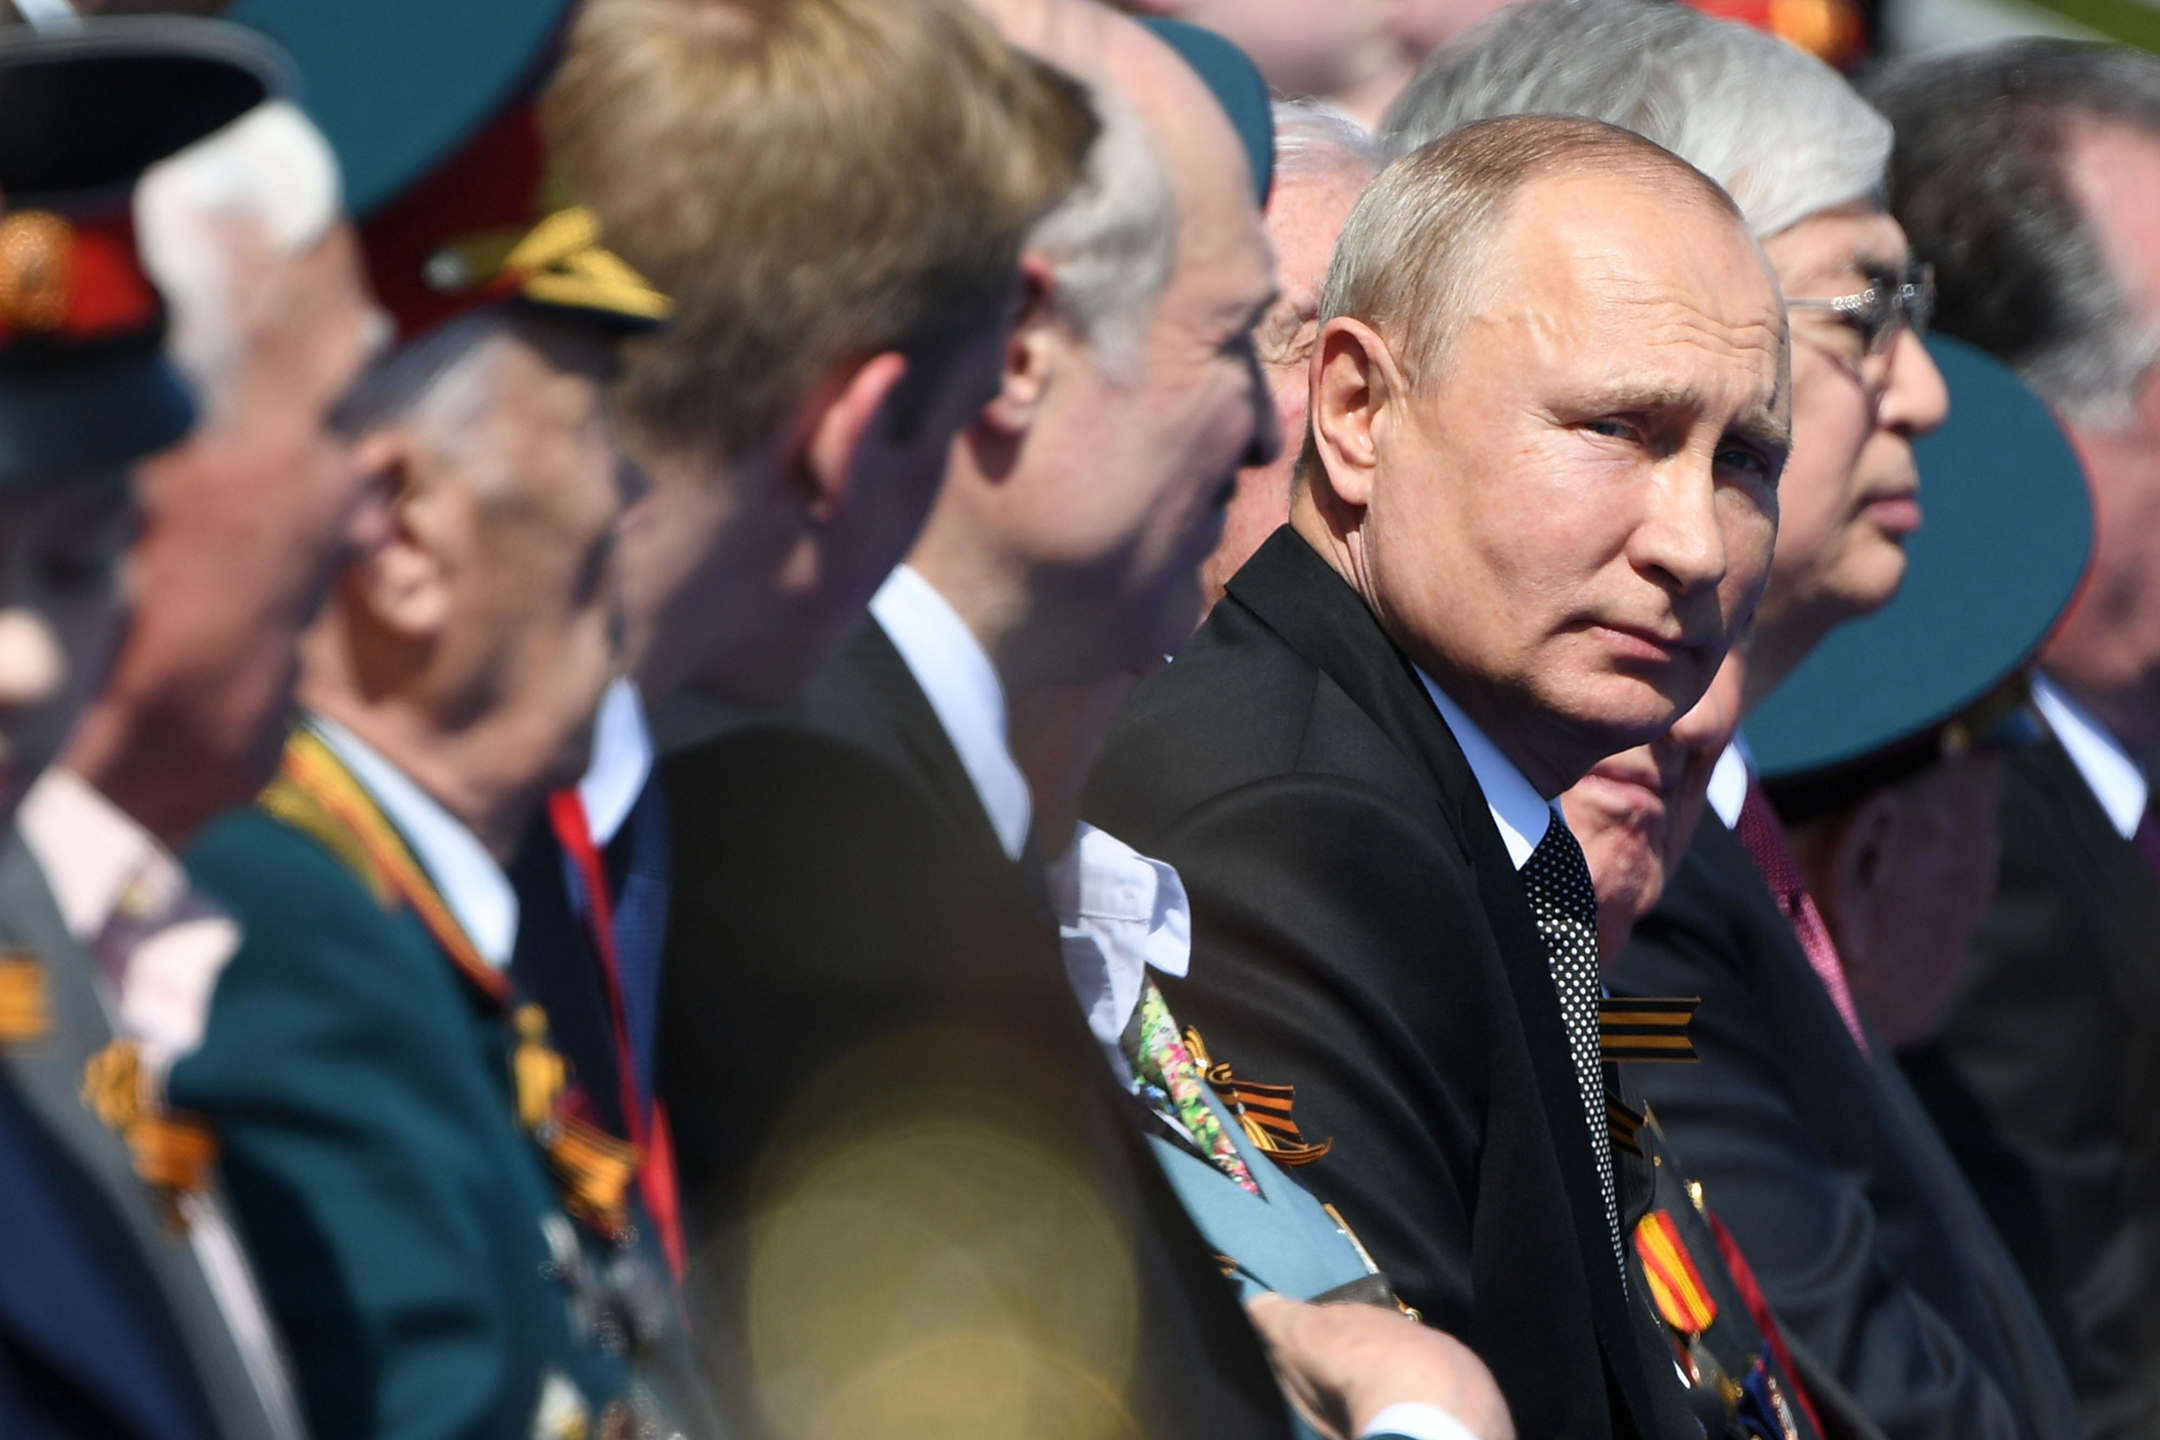 Vladimir Putin seated among generals and lawmakers